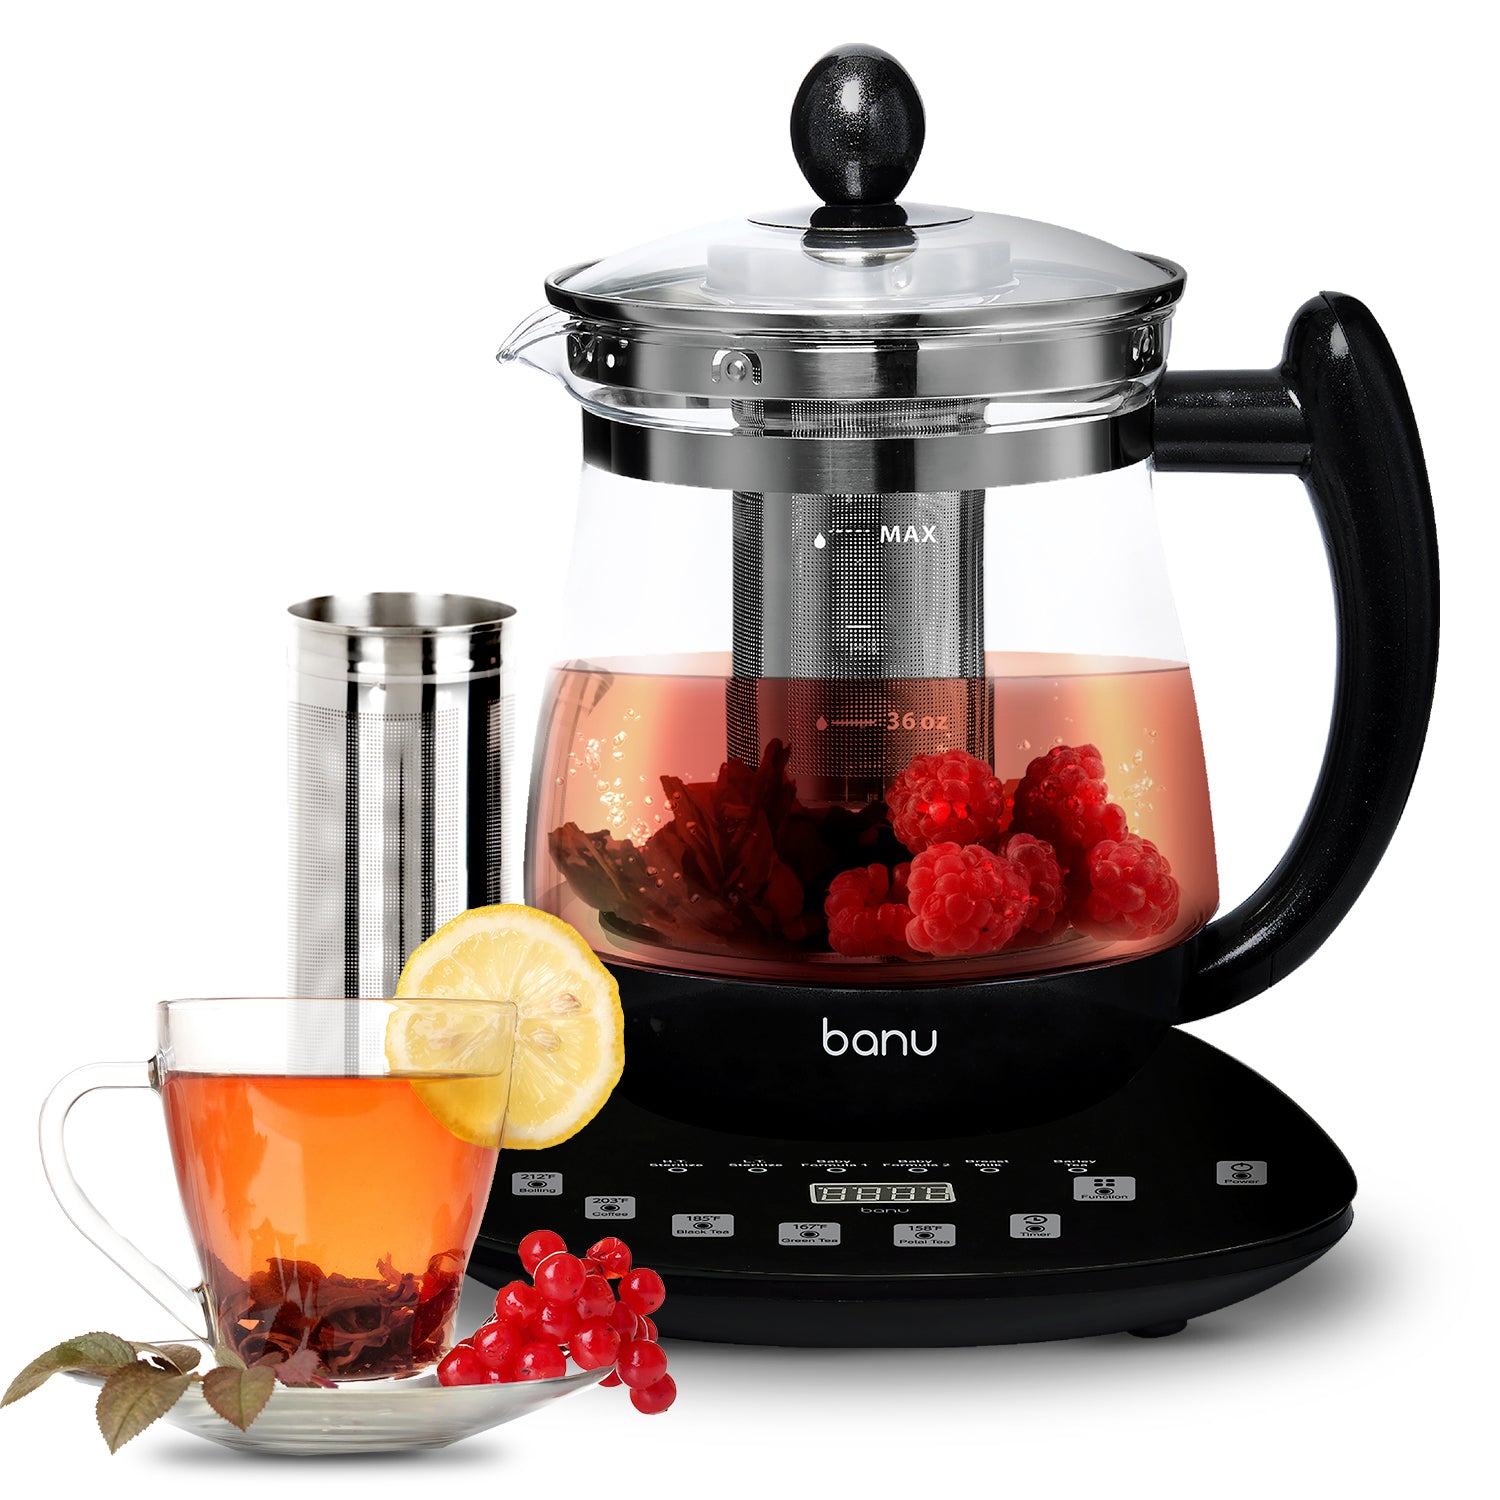 [SALE] Banu Smart Teapot BANU Electric Tea Kettle 1.8L Glass Teapot with  One Touch Temperature Control, Food Grade Stainless Steel Inner Lid,  Infuser